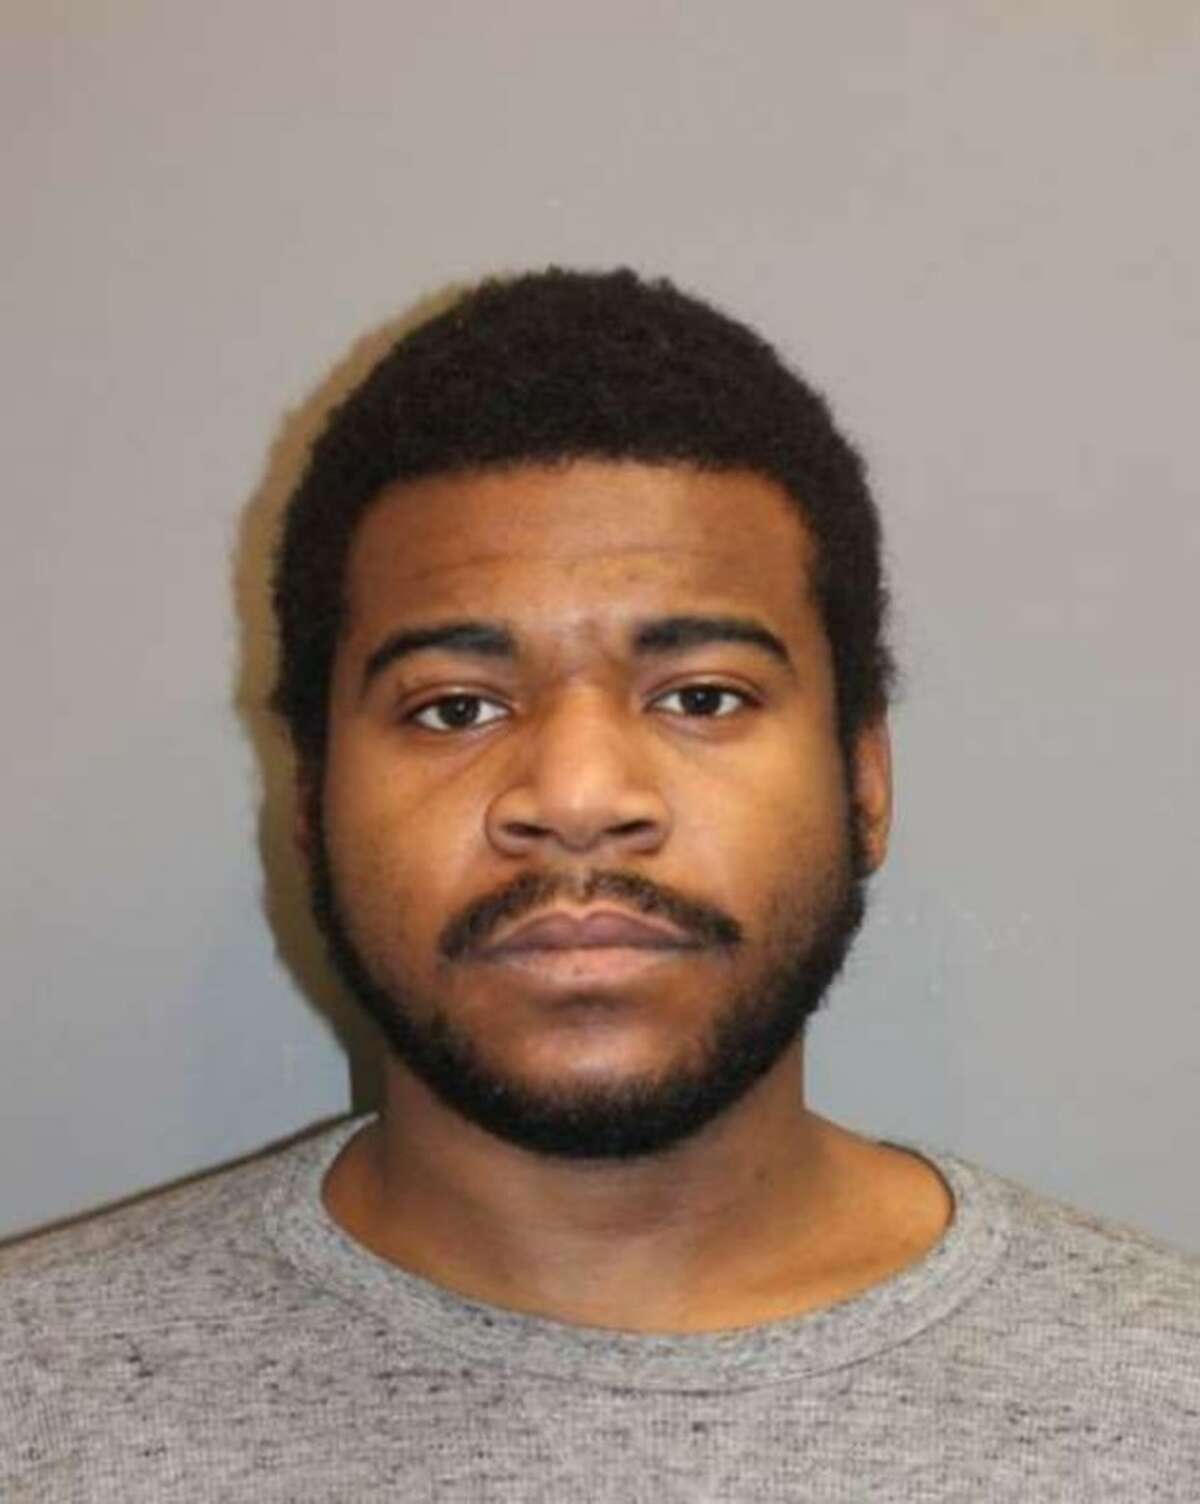 Desmond McFarlane, 25, and Troy Leigh Robert Brannen, 26, both of Norwalk, were charged with criminal attempt to commit first-degree assault, conspiracy to commit first-degree assault, first-degree reckless endangerment and illegal discharge of a firearm for allegedly shooting at a third party on Garner Street Friday, according to Norwalk police. McFarlane is pictured.